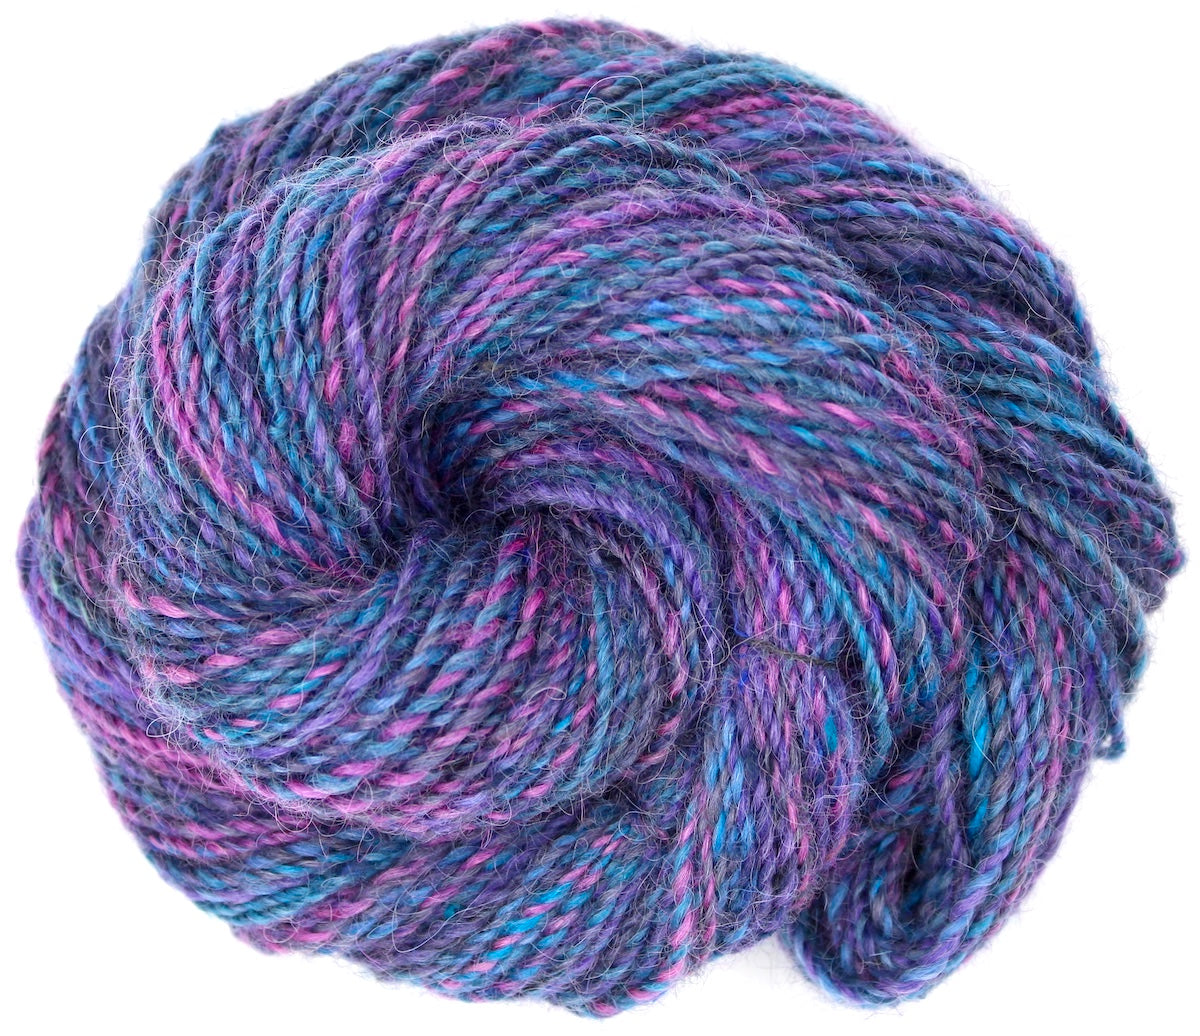 A one of a kind, hand dyed Variegated skein of multicolored Hot Pink, Blue, and Purple self-striping wool Yarn coiled attractively in the center of the frame. 